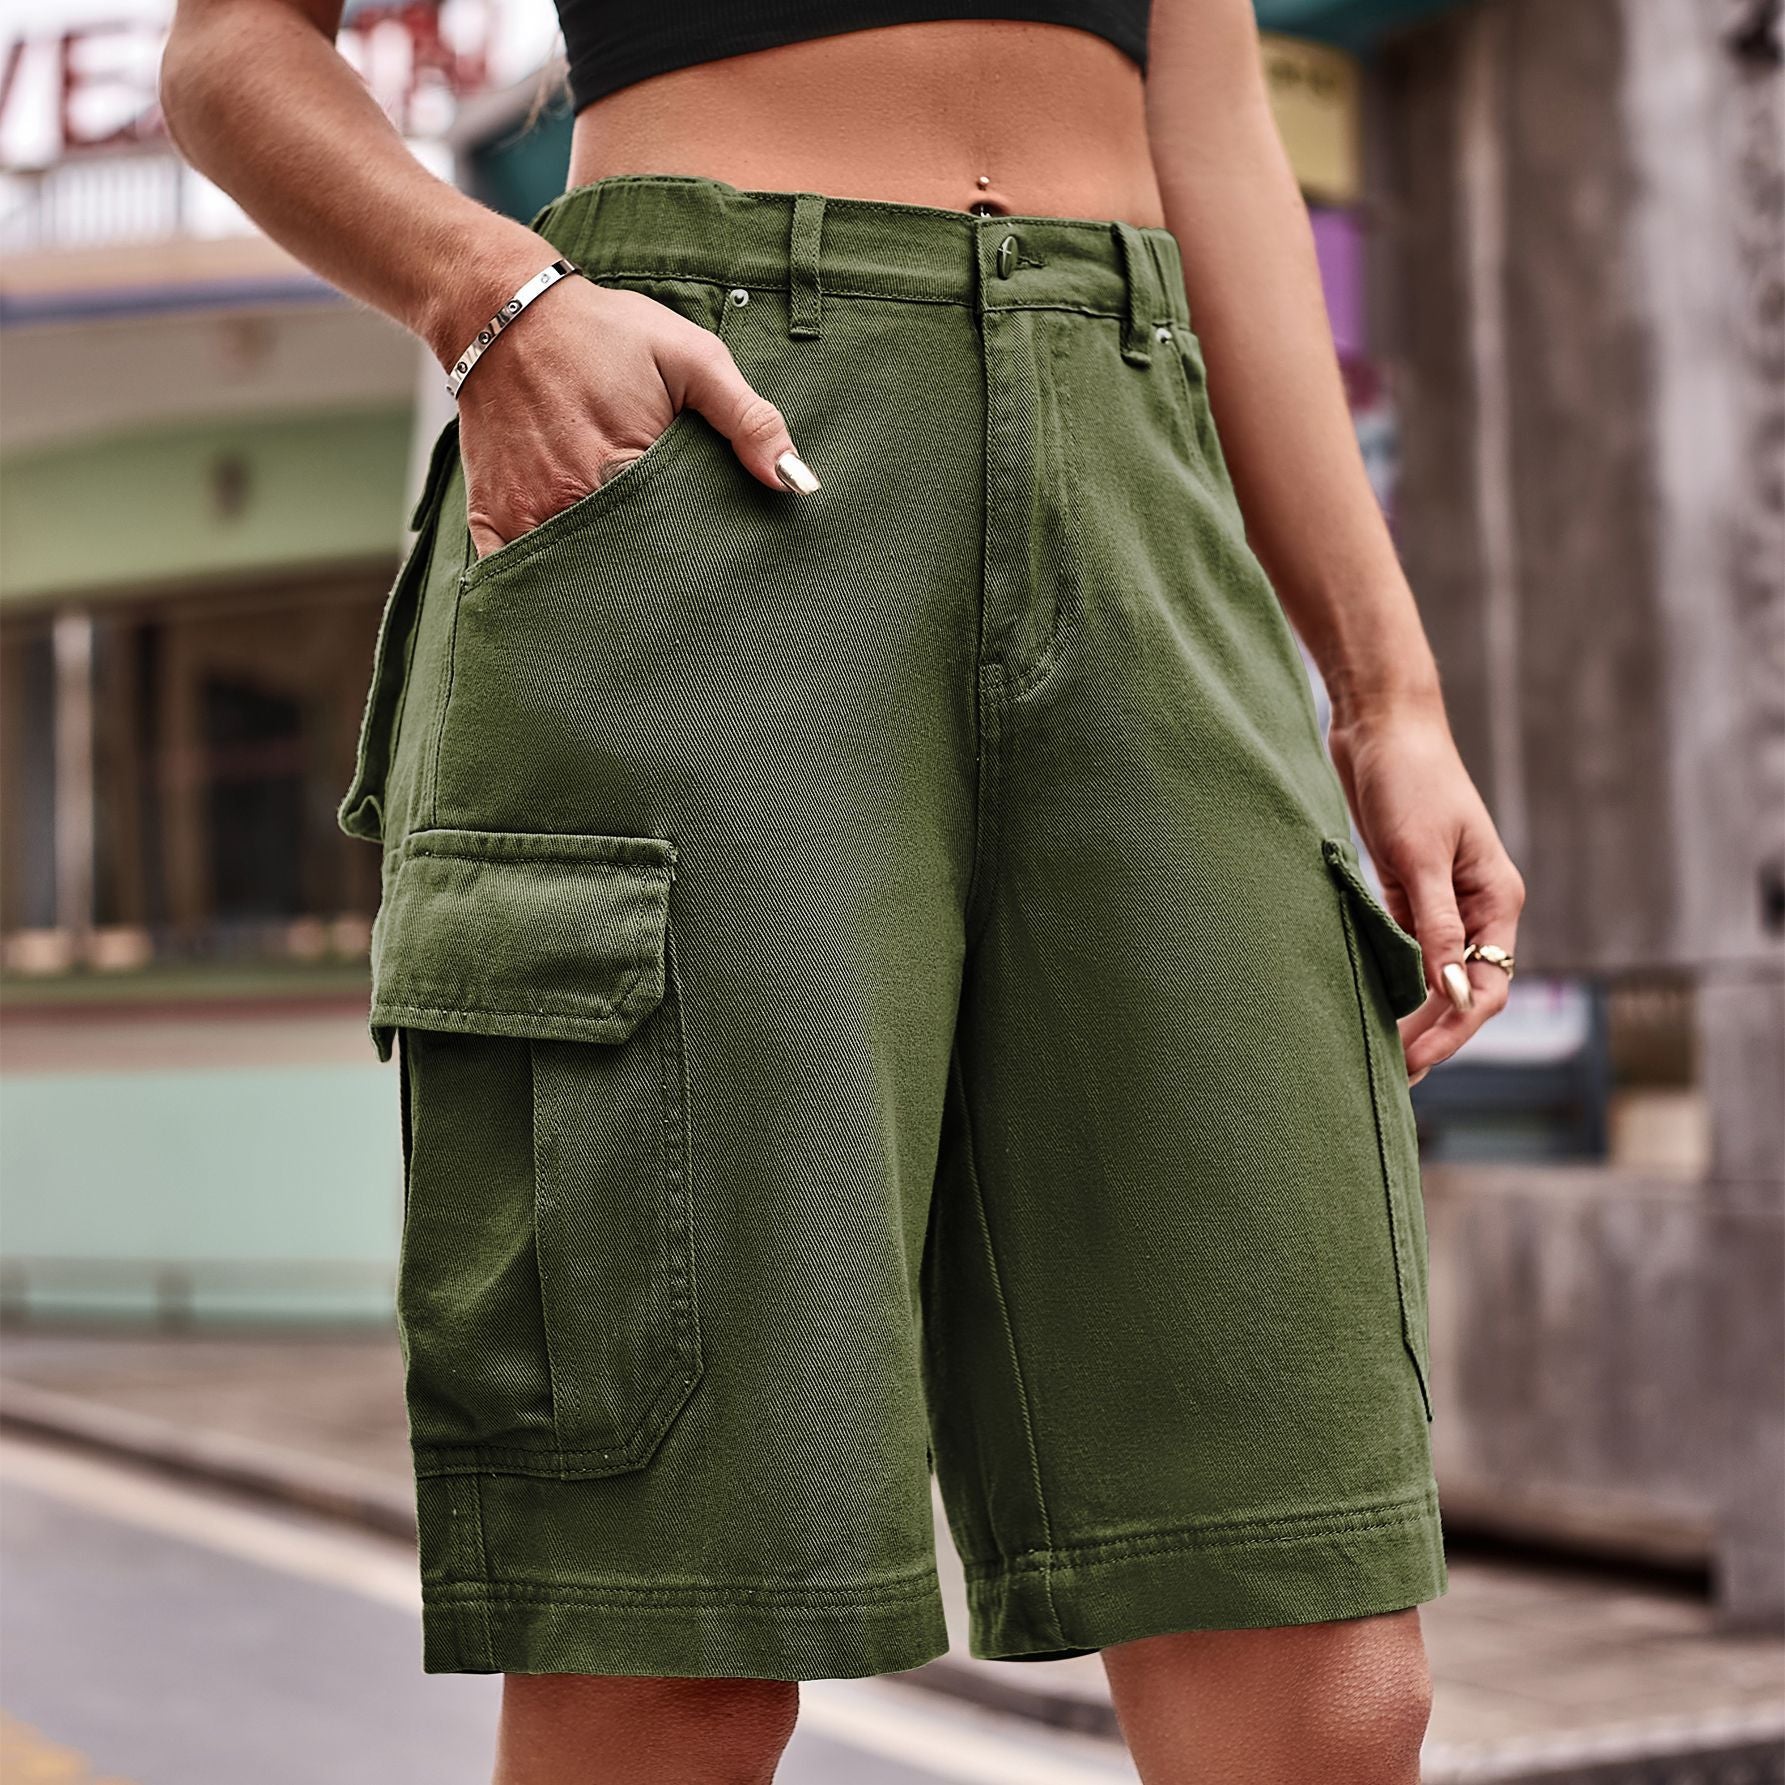 Denim Cargo Shorts with Pockets - Green / S - Women’s Clothing & Accessories - Shorts - 21 - 2024